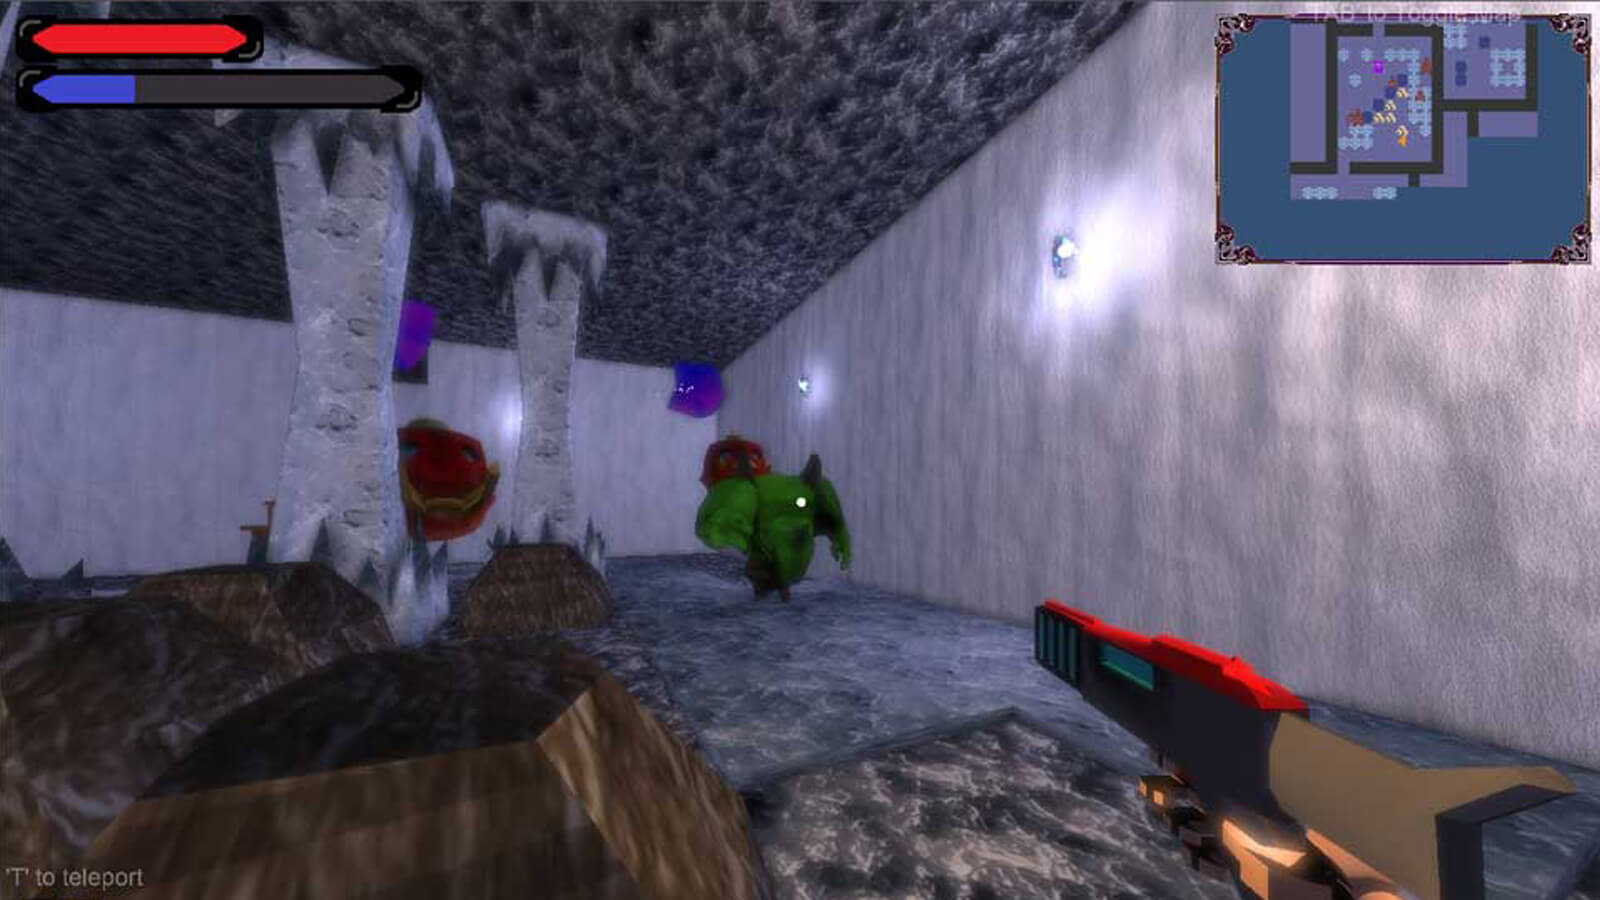 A gun is pointed toward a green ogre-like enemy from a first-person perspective in a rocky, underground environment